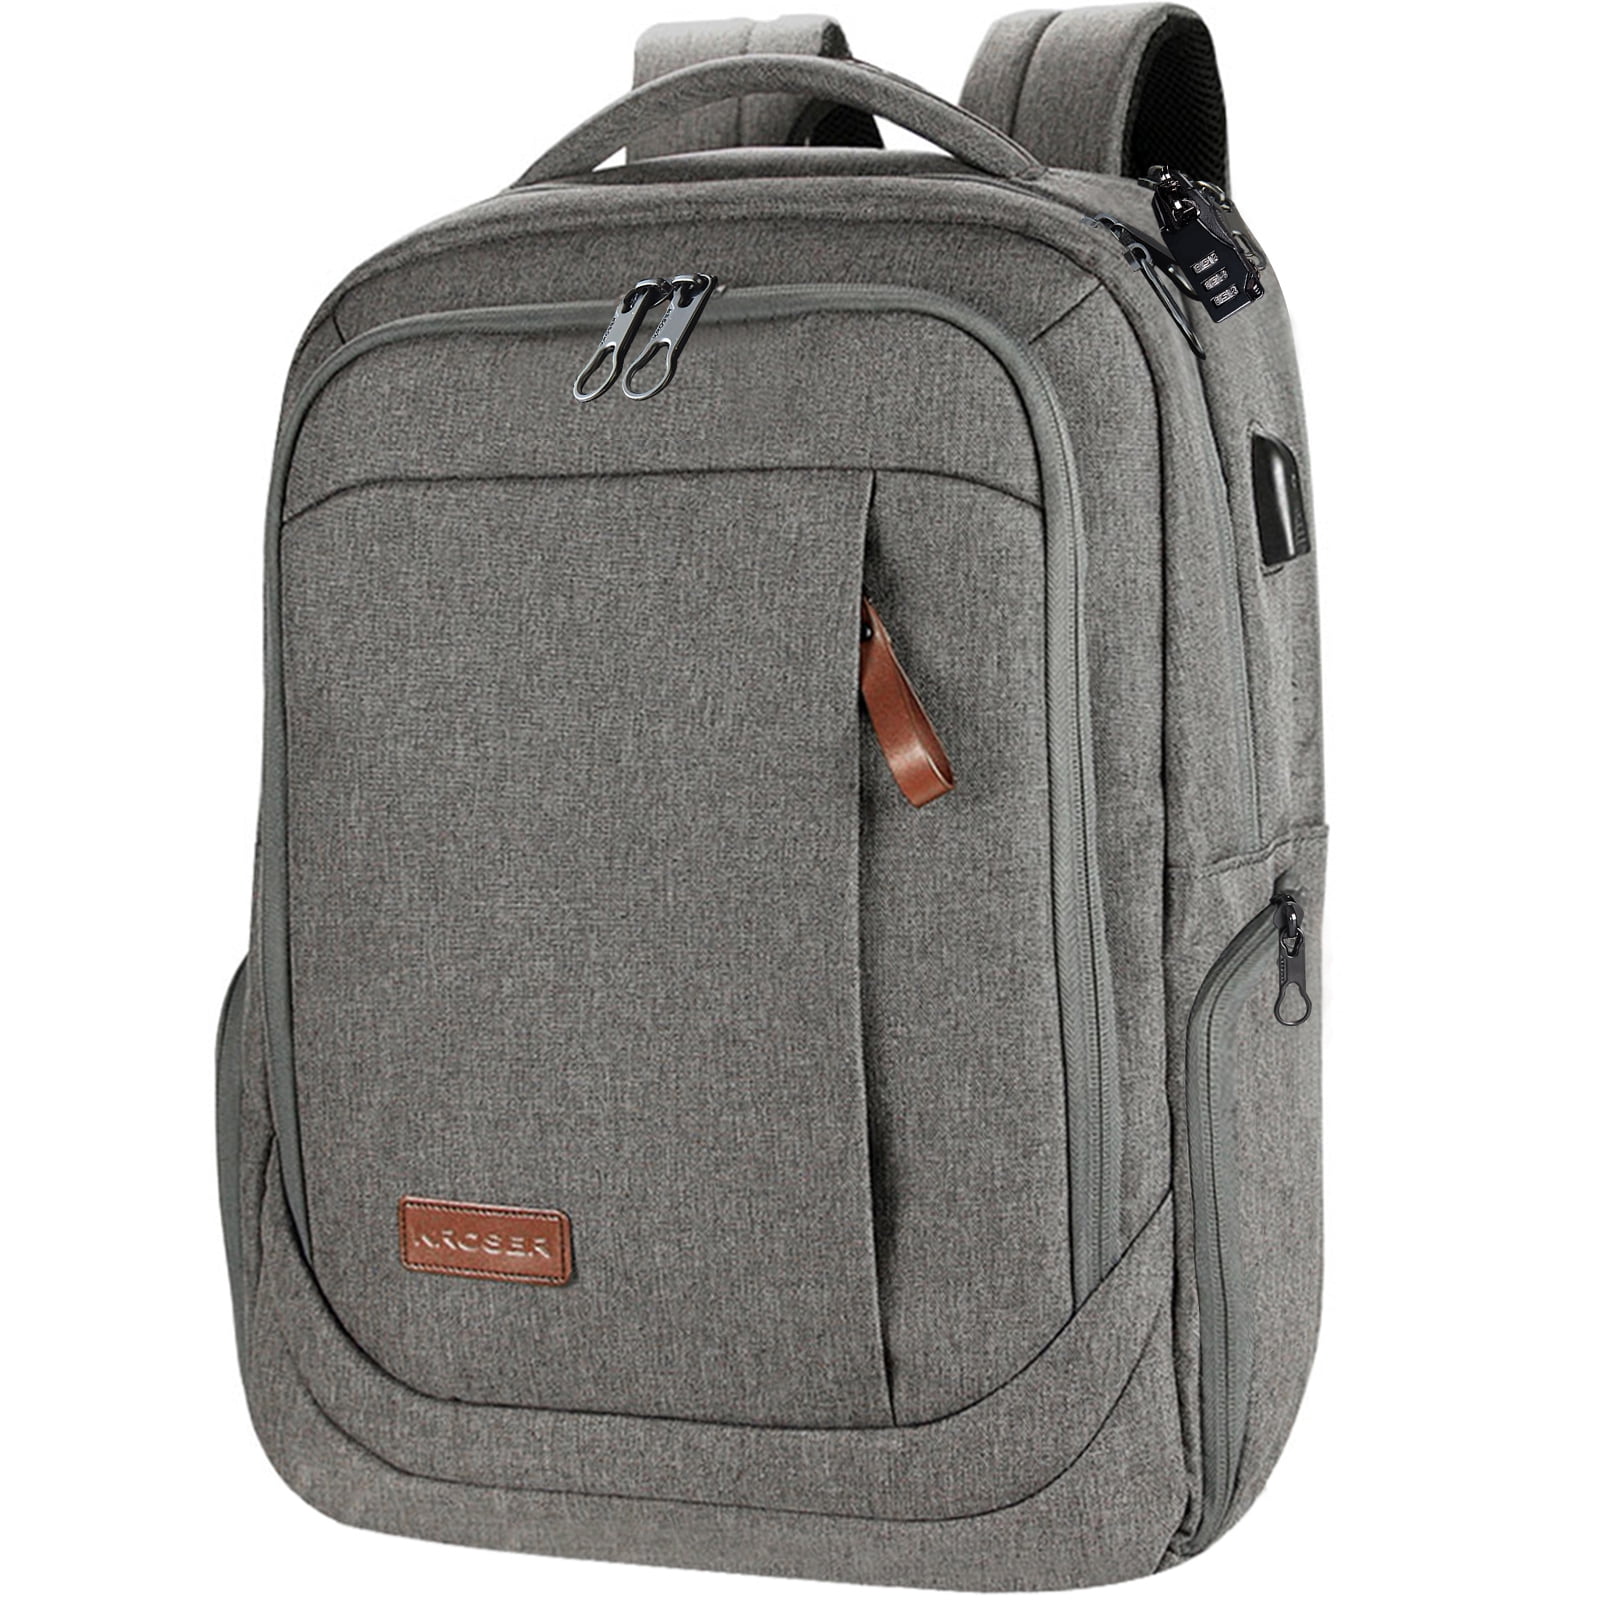 Matein 15.6 Inch Travel Laptop Backpack, Business Computer Bag 